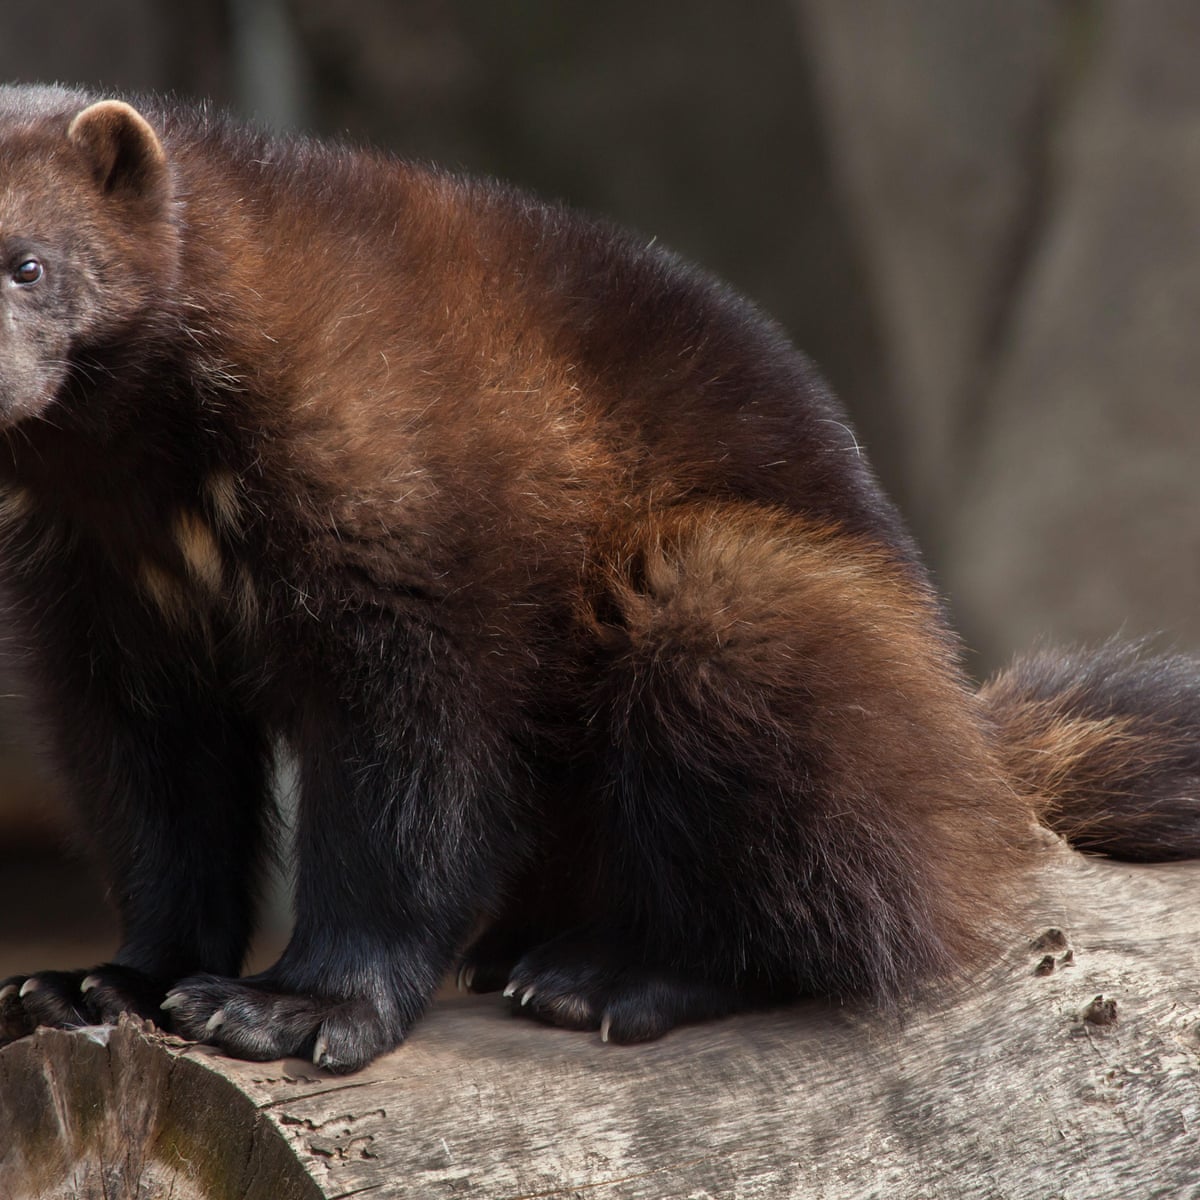 Heads in the sand': conservationists condemn US failure to protect  wolverines | Wildlife | The Guardian